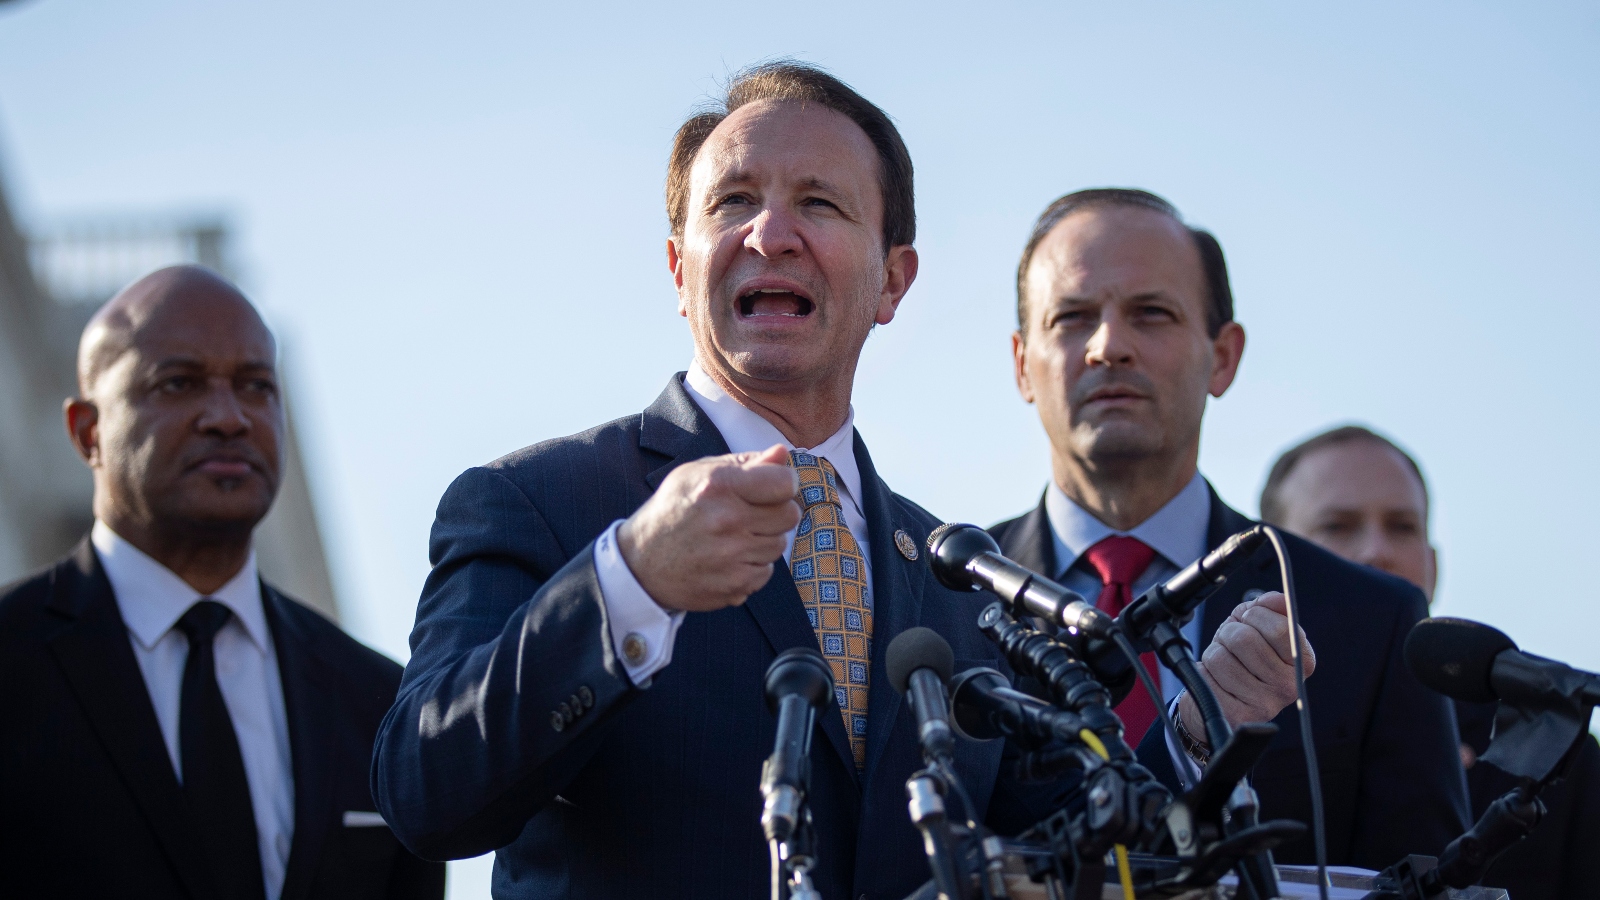 Louisiana Attorney General Jeff Landry and other Republican state attorneys general speak during a press conference to discuss the impeachment trial of President Donald Trump at the U.S. Capitol in January 2020.